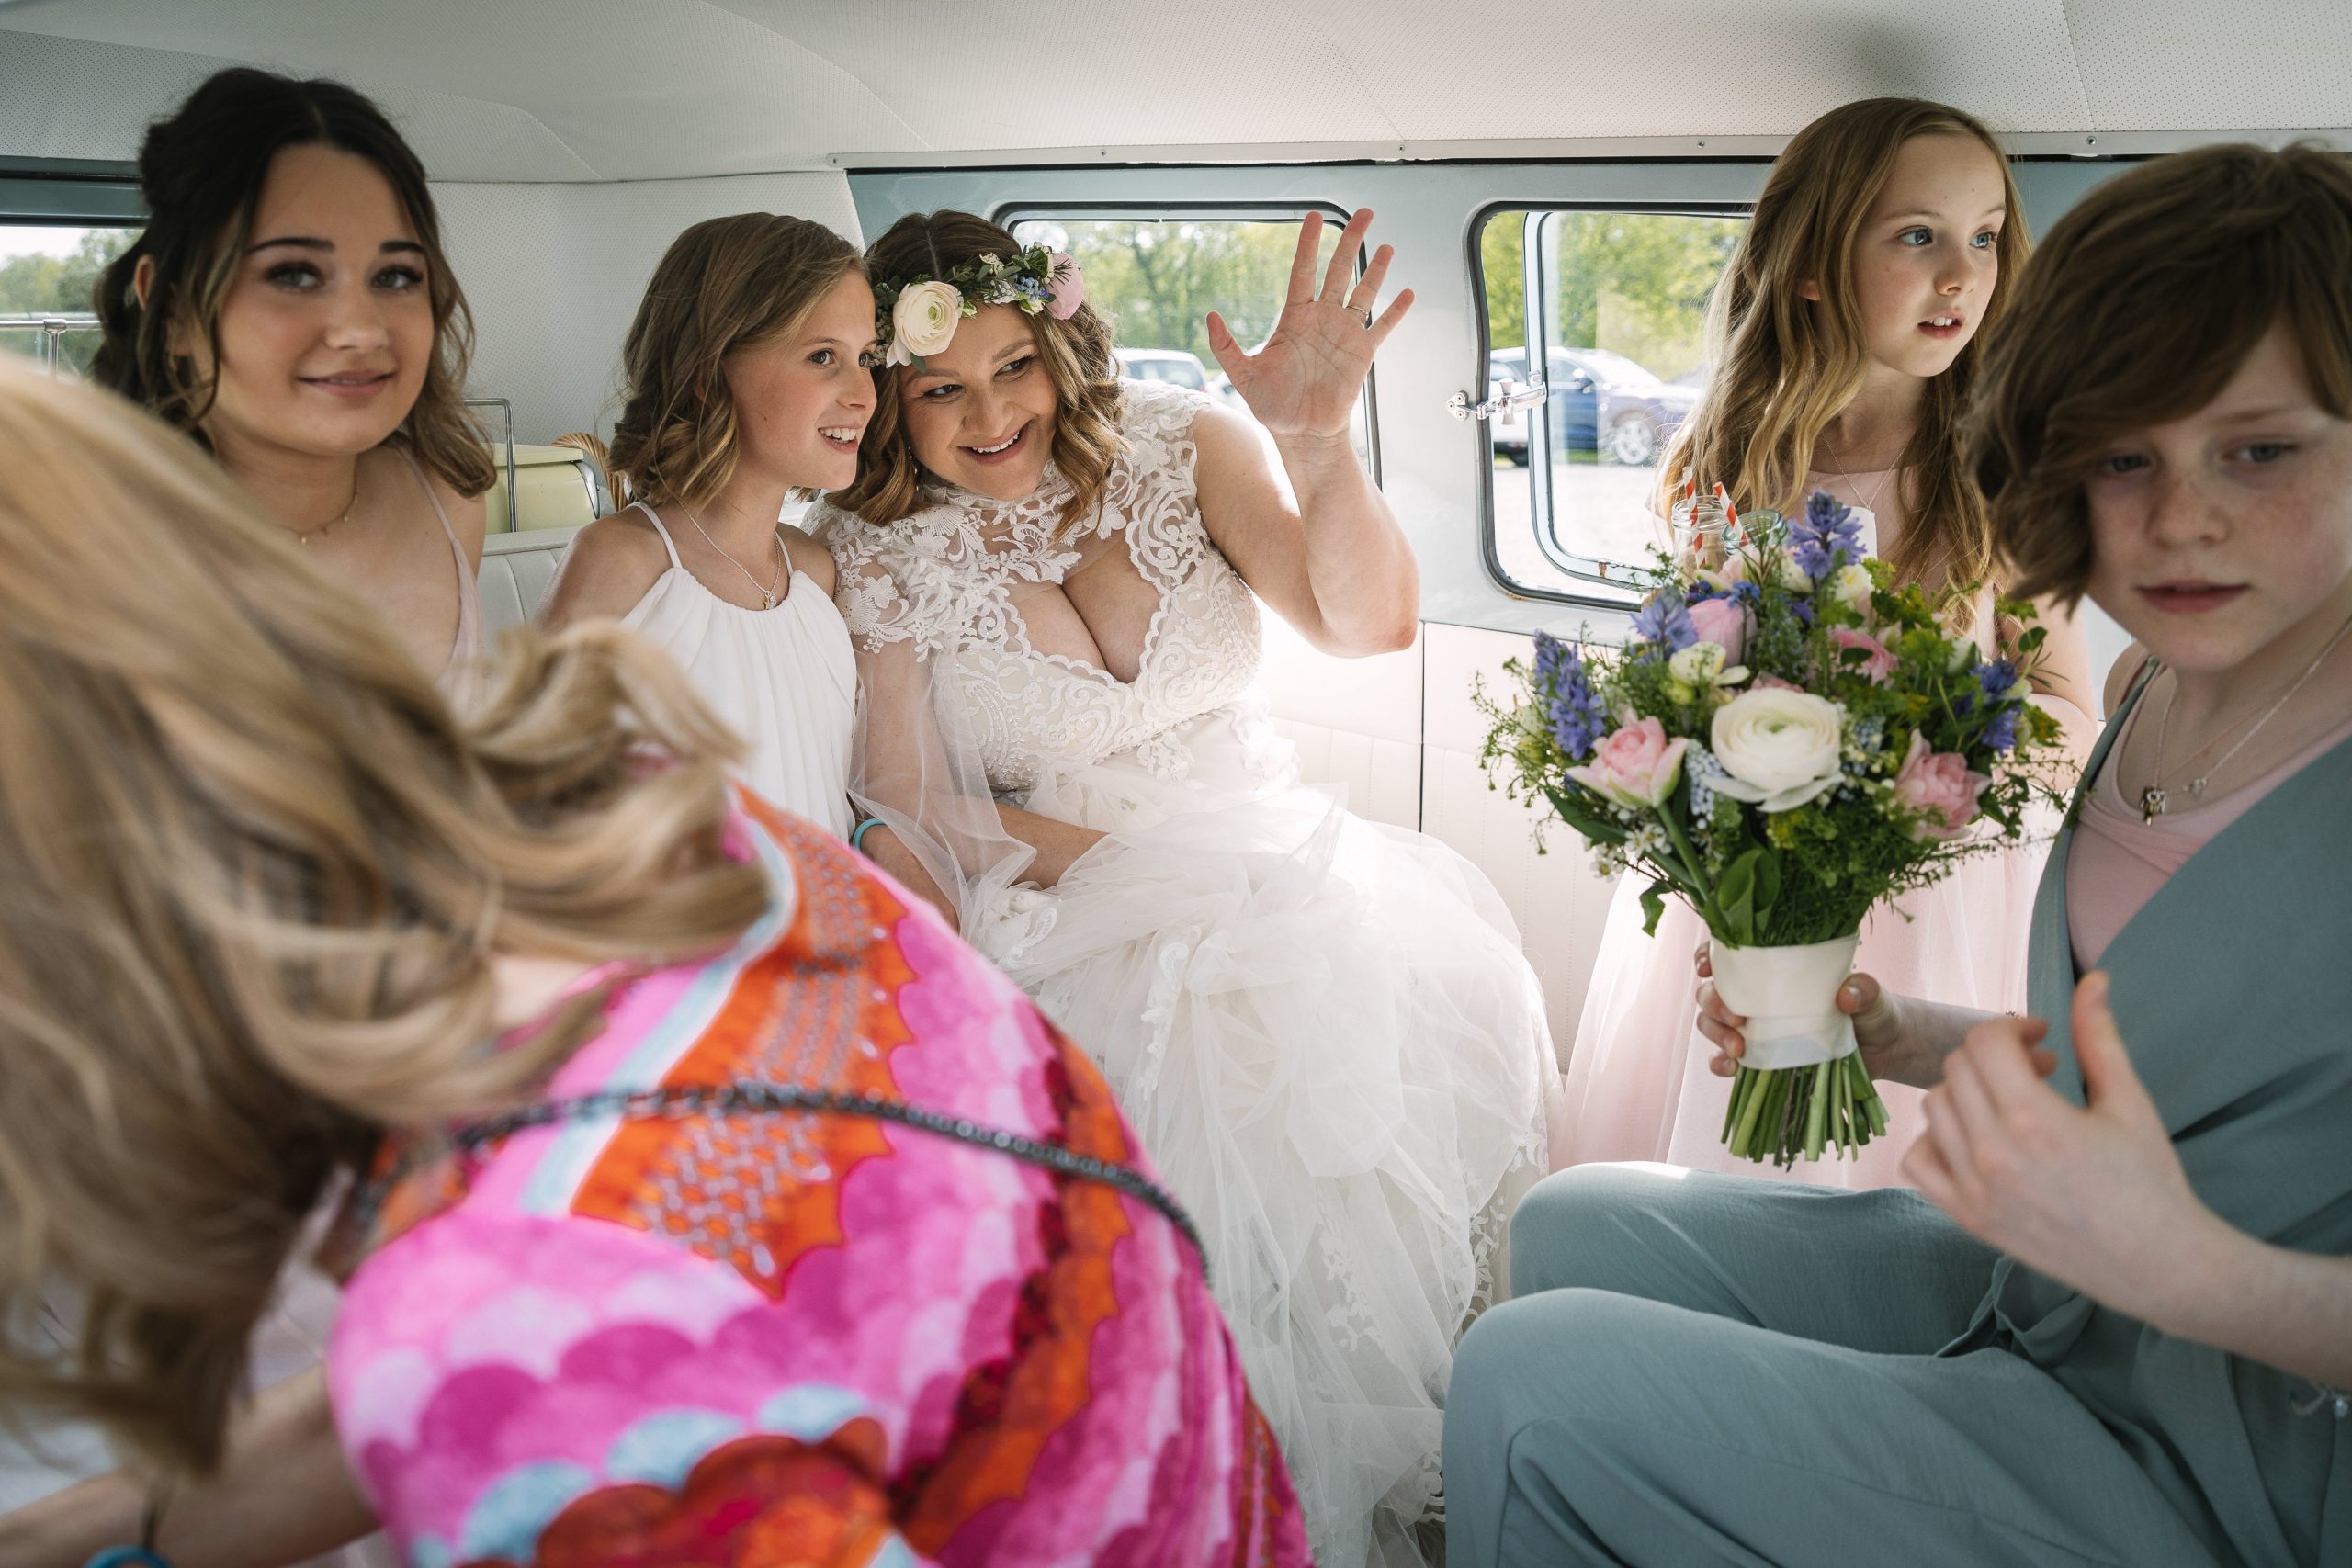 bride and bridal party arriving at venue gildings_barns on wedding day in volkswagen campervan and waving at camera natural unposed candid wedding photography by LGBTQ_friendly documentary wedding photographer surrey sussex